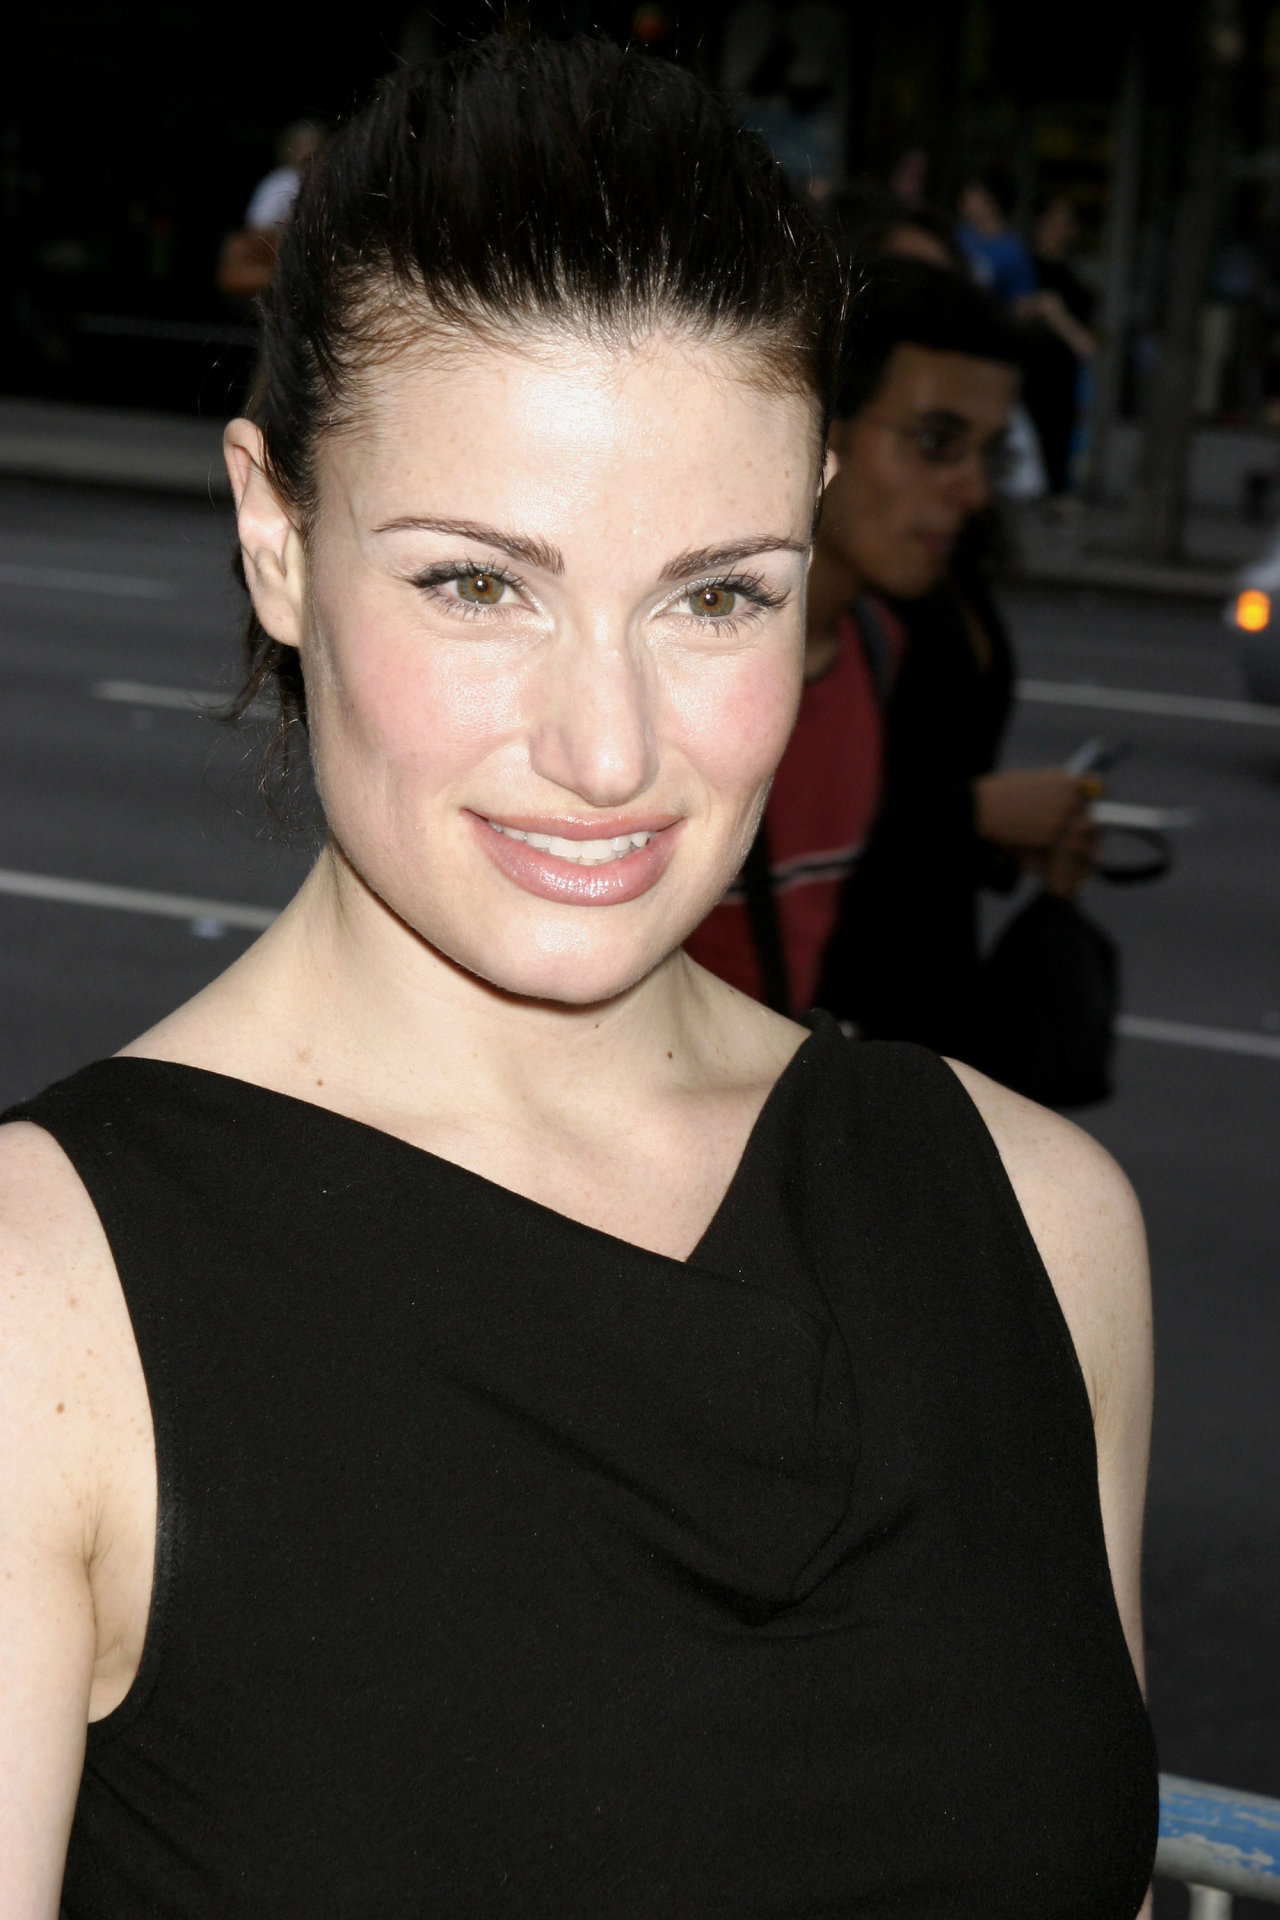 Idina Menzel leaked wallpapers